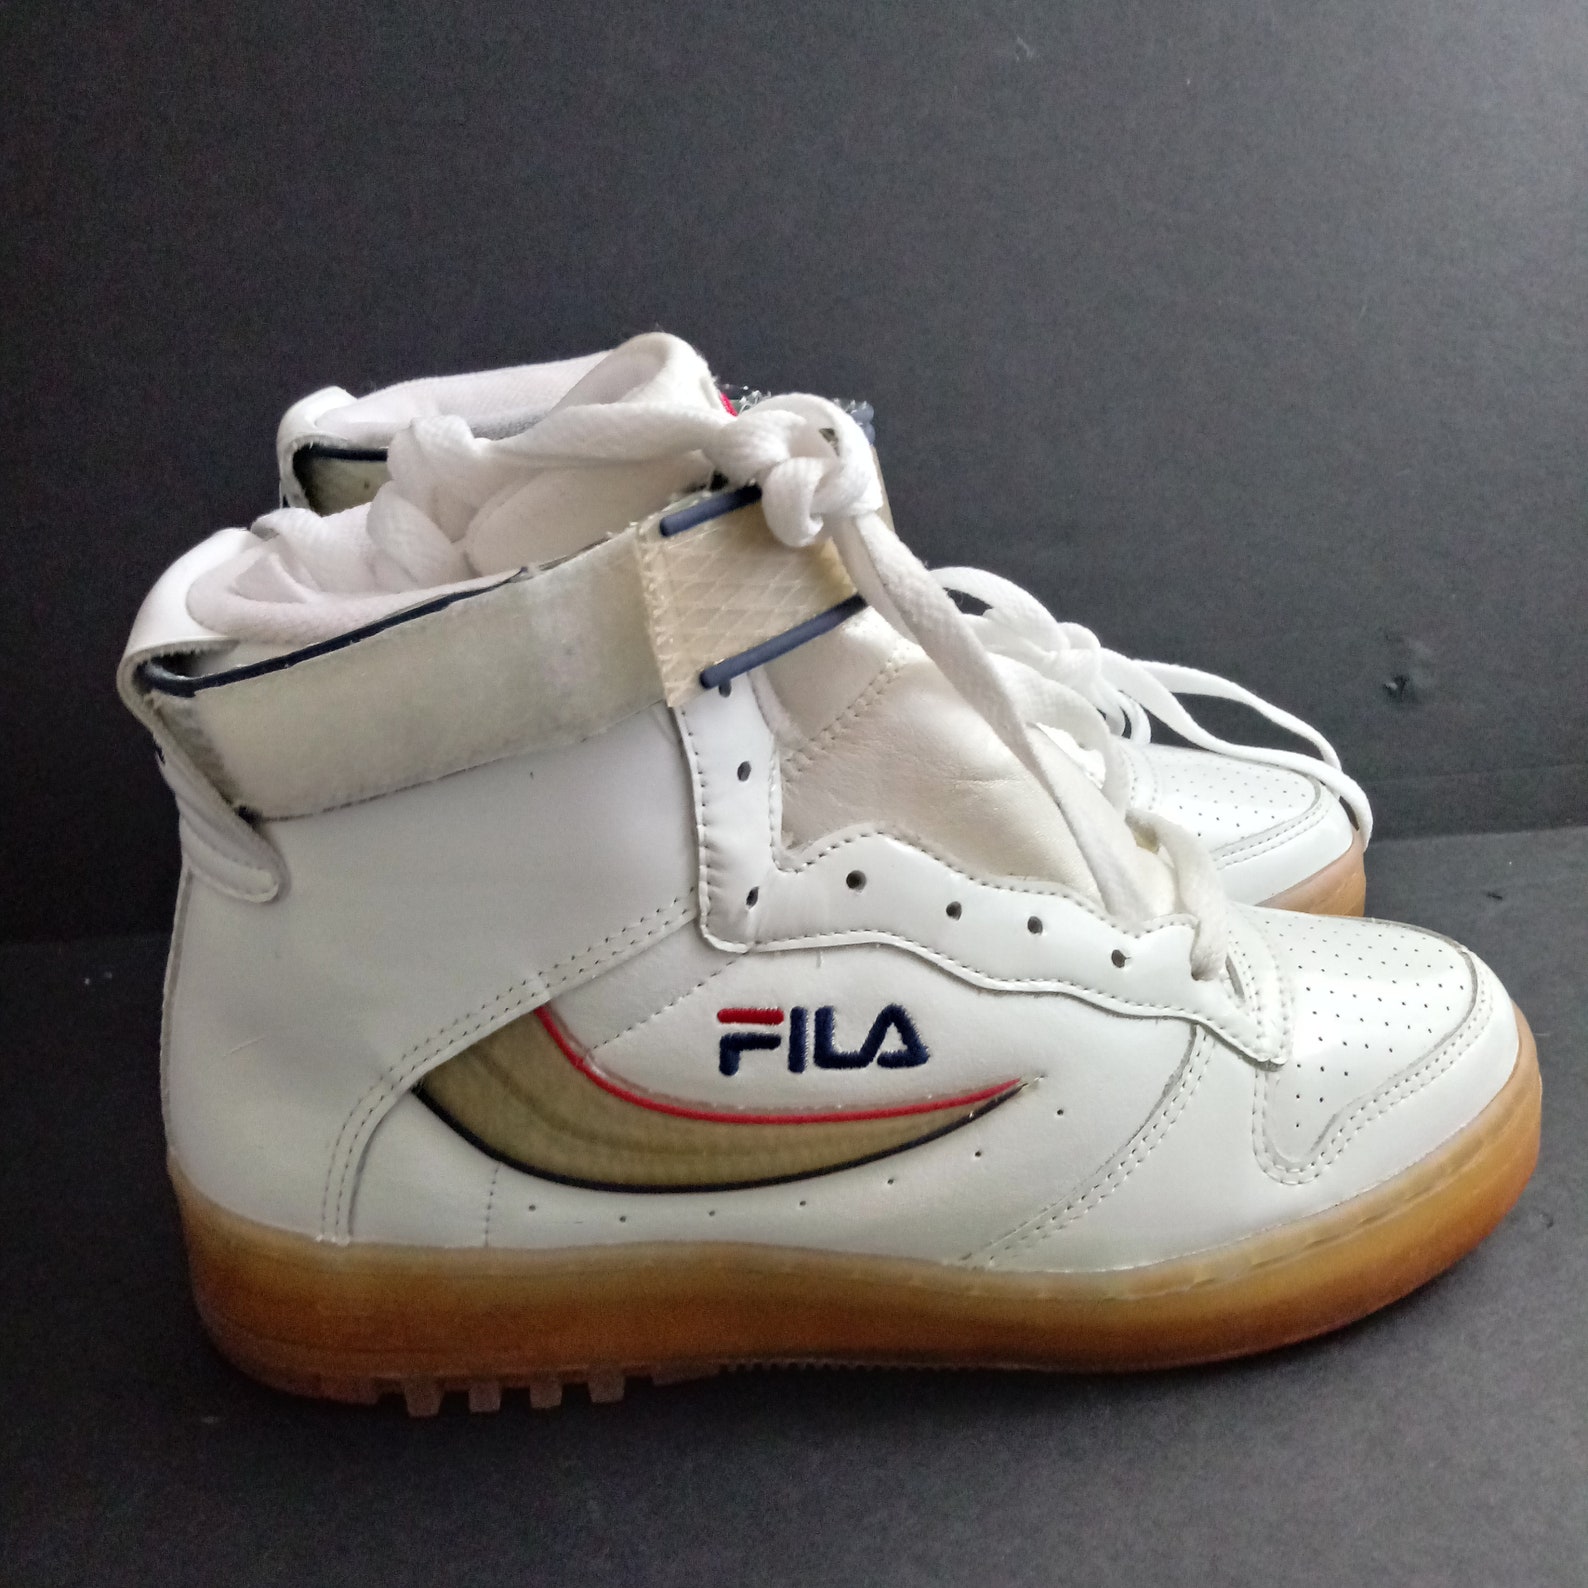 Vintage Fila high top retro 1996 casual white red blue | Etsy